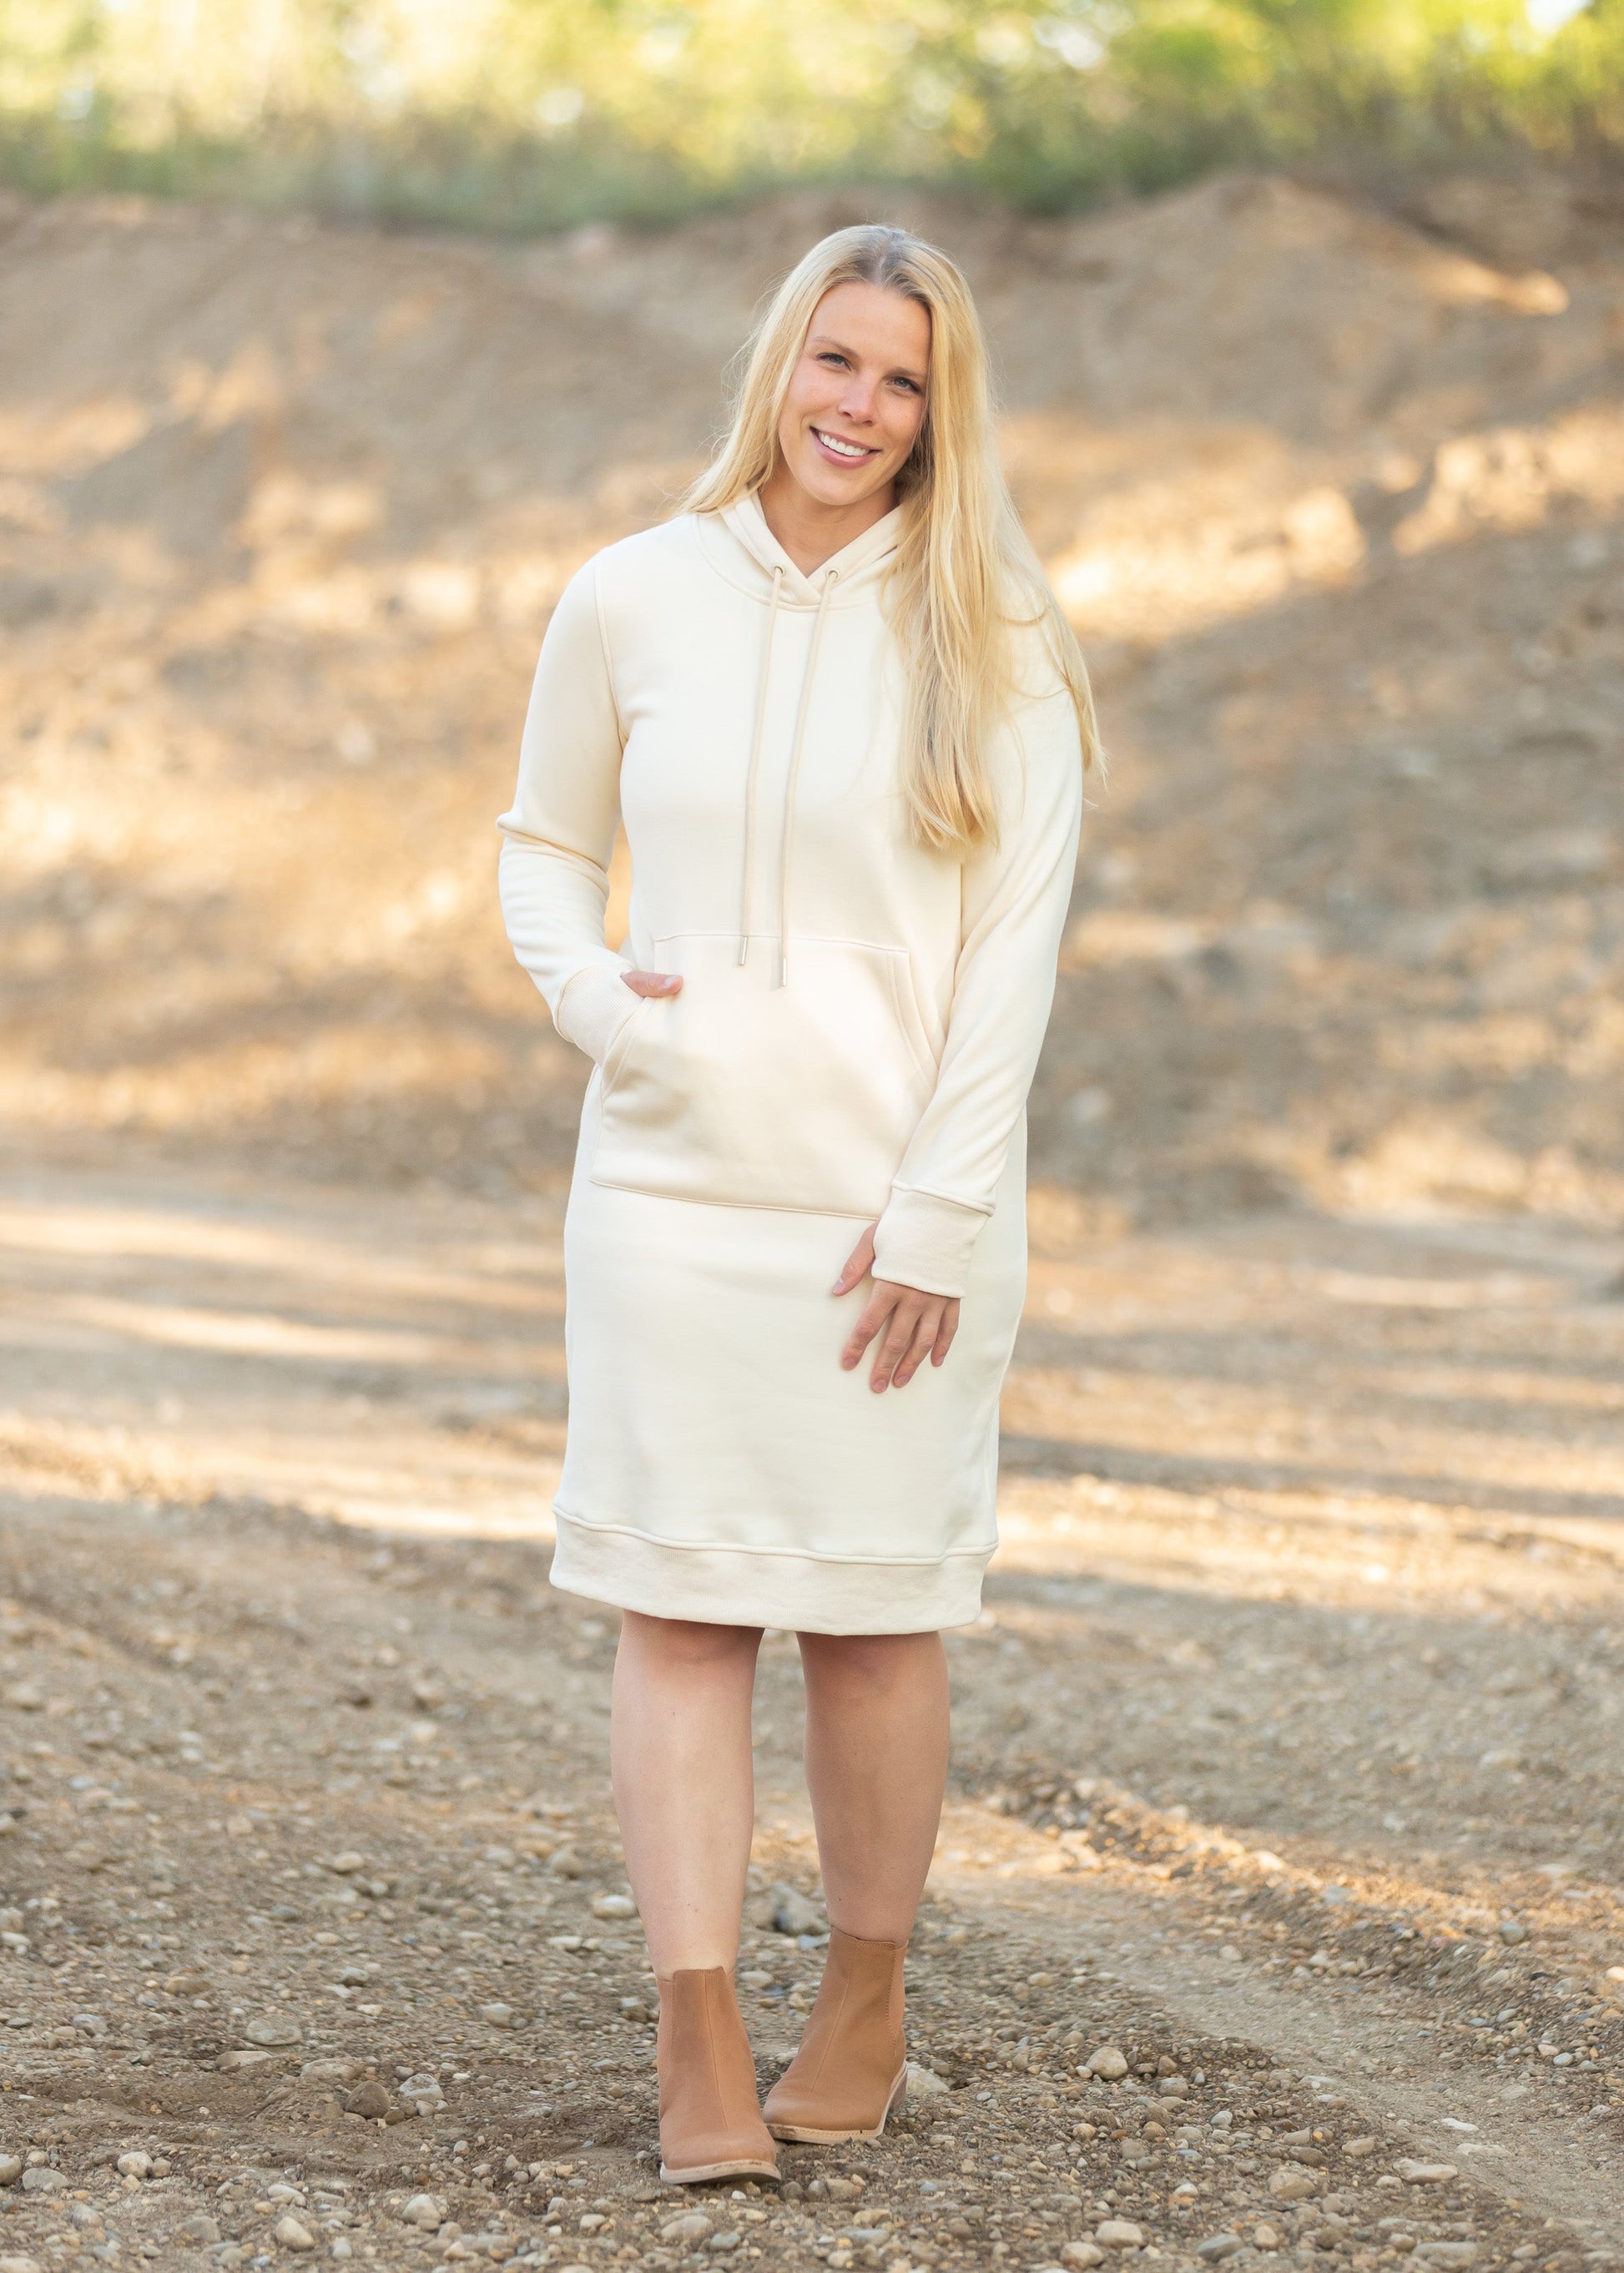 The Marti Sweatshirt Midi Dress is an Inherit Design we made for all your cozy activities! This dress will be great for snuggling up on the couch, heading out during cooler weather or paired with leggings for work! It is super fuzzy on the inside with an elevated, quality fabric on the outside with a kangaroo pocket. There are wide ribbed hems on the bottom and on the cuffs with thumb holes!